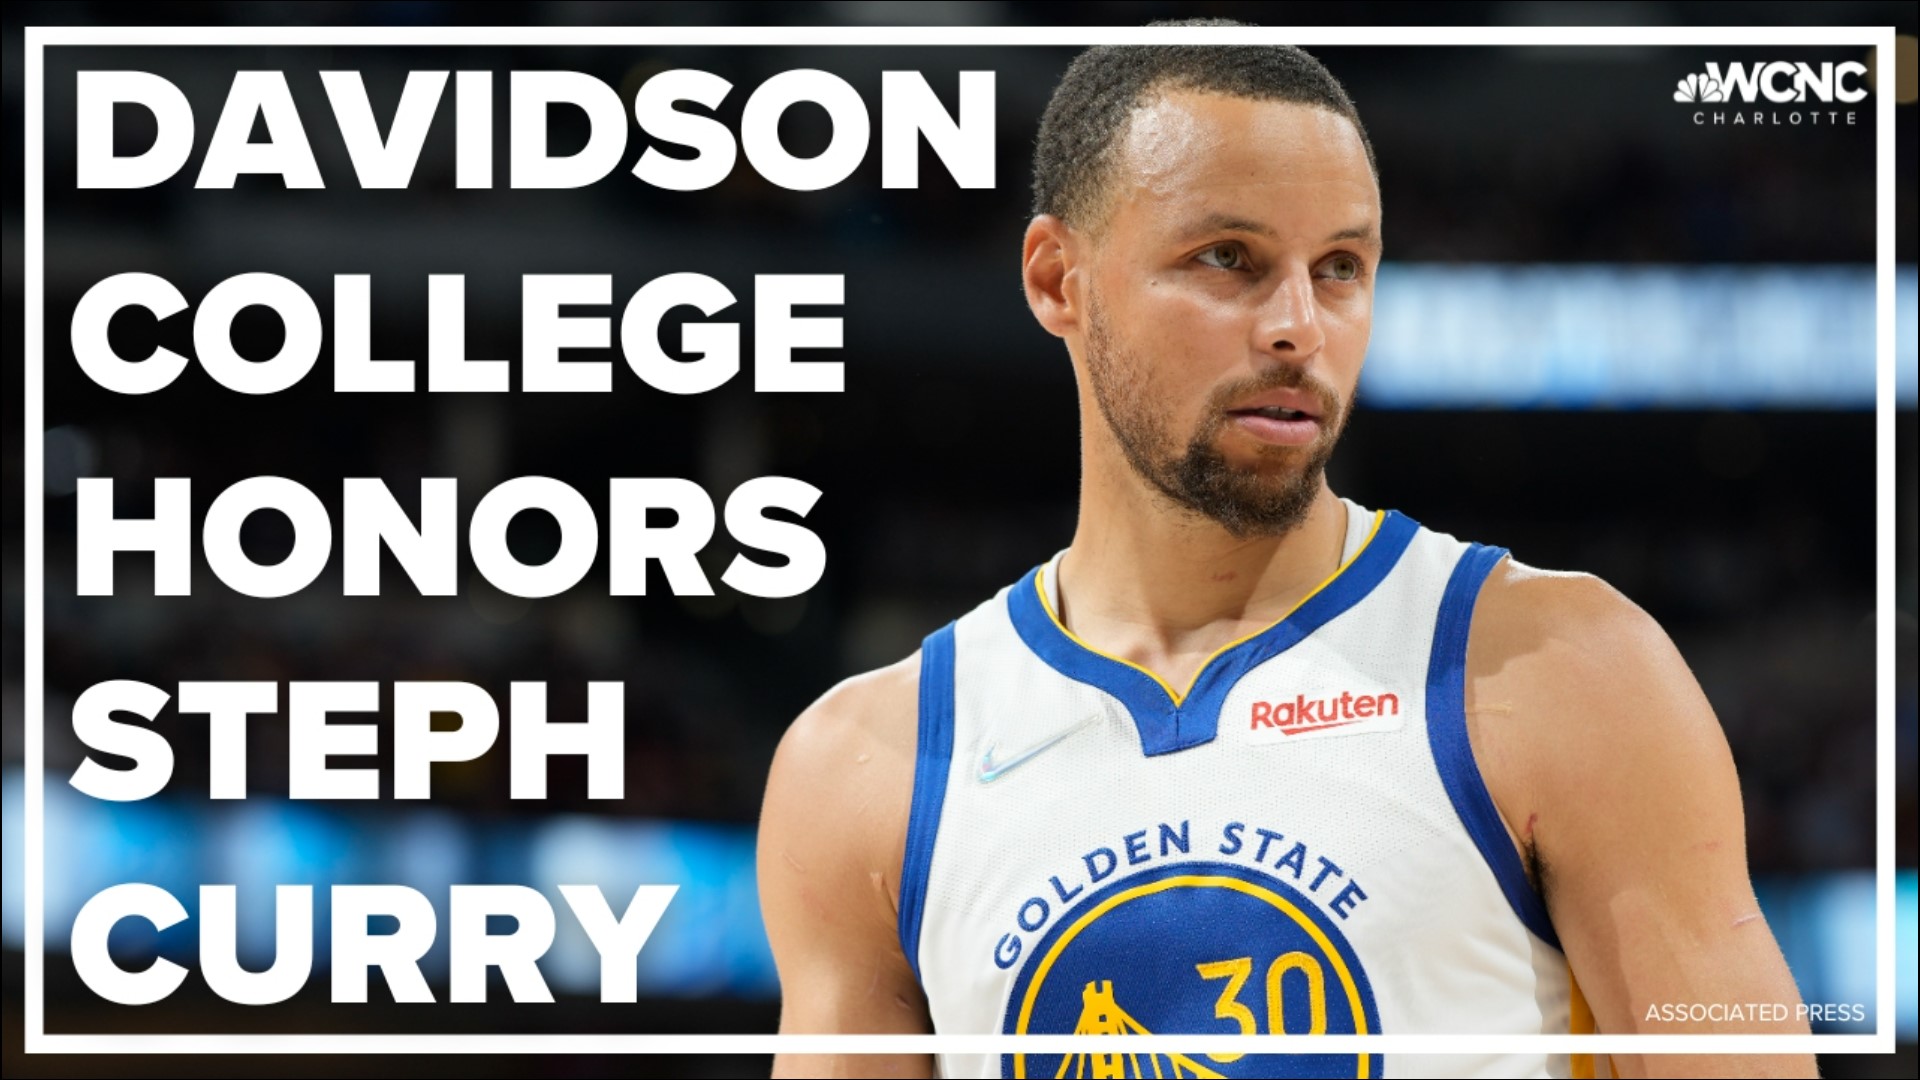 Curry was awarded his degree, was inducted into the Davidson College Athletics Hall of Fame, and retired his number 30.